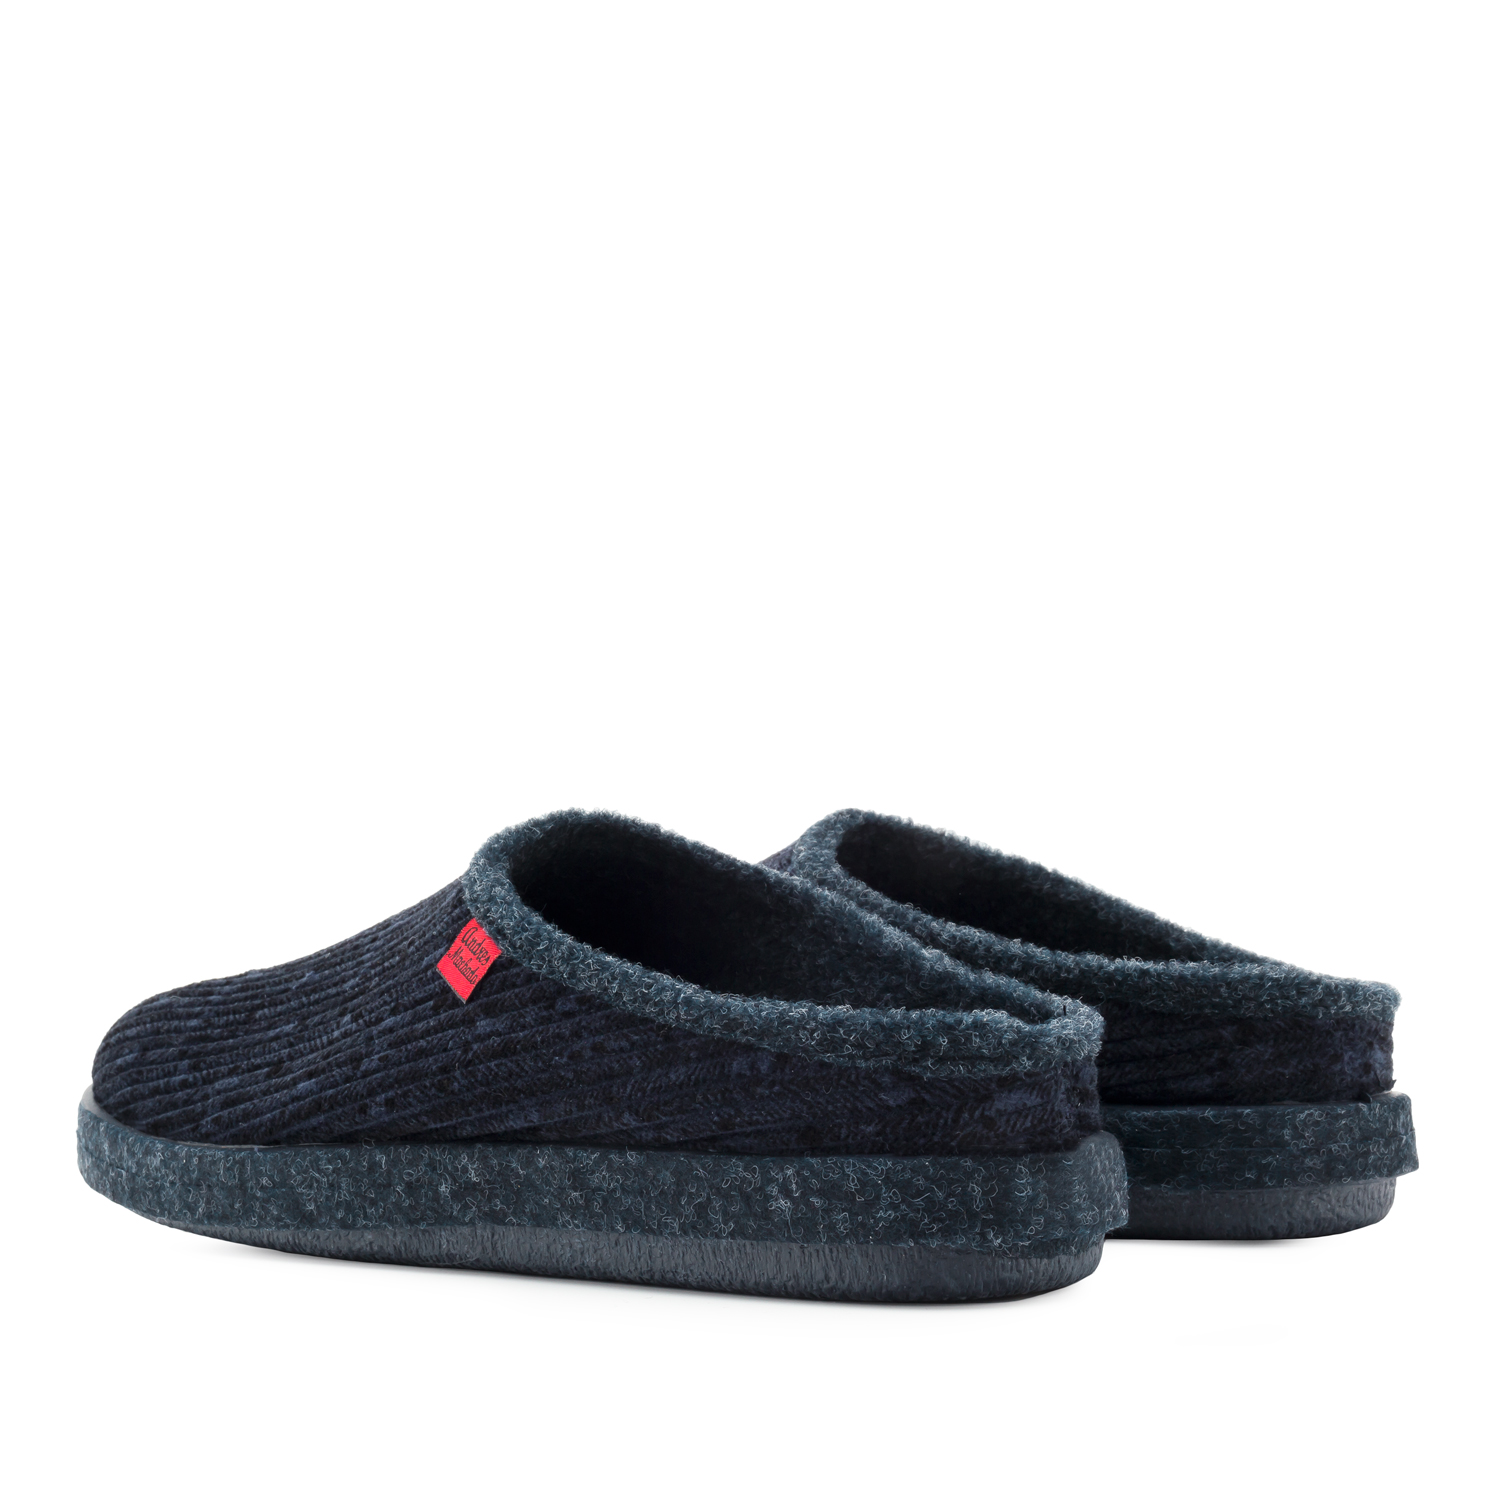 Very comfortable Blue Corduroy Slippers with footbed 